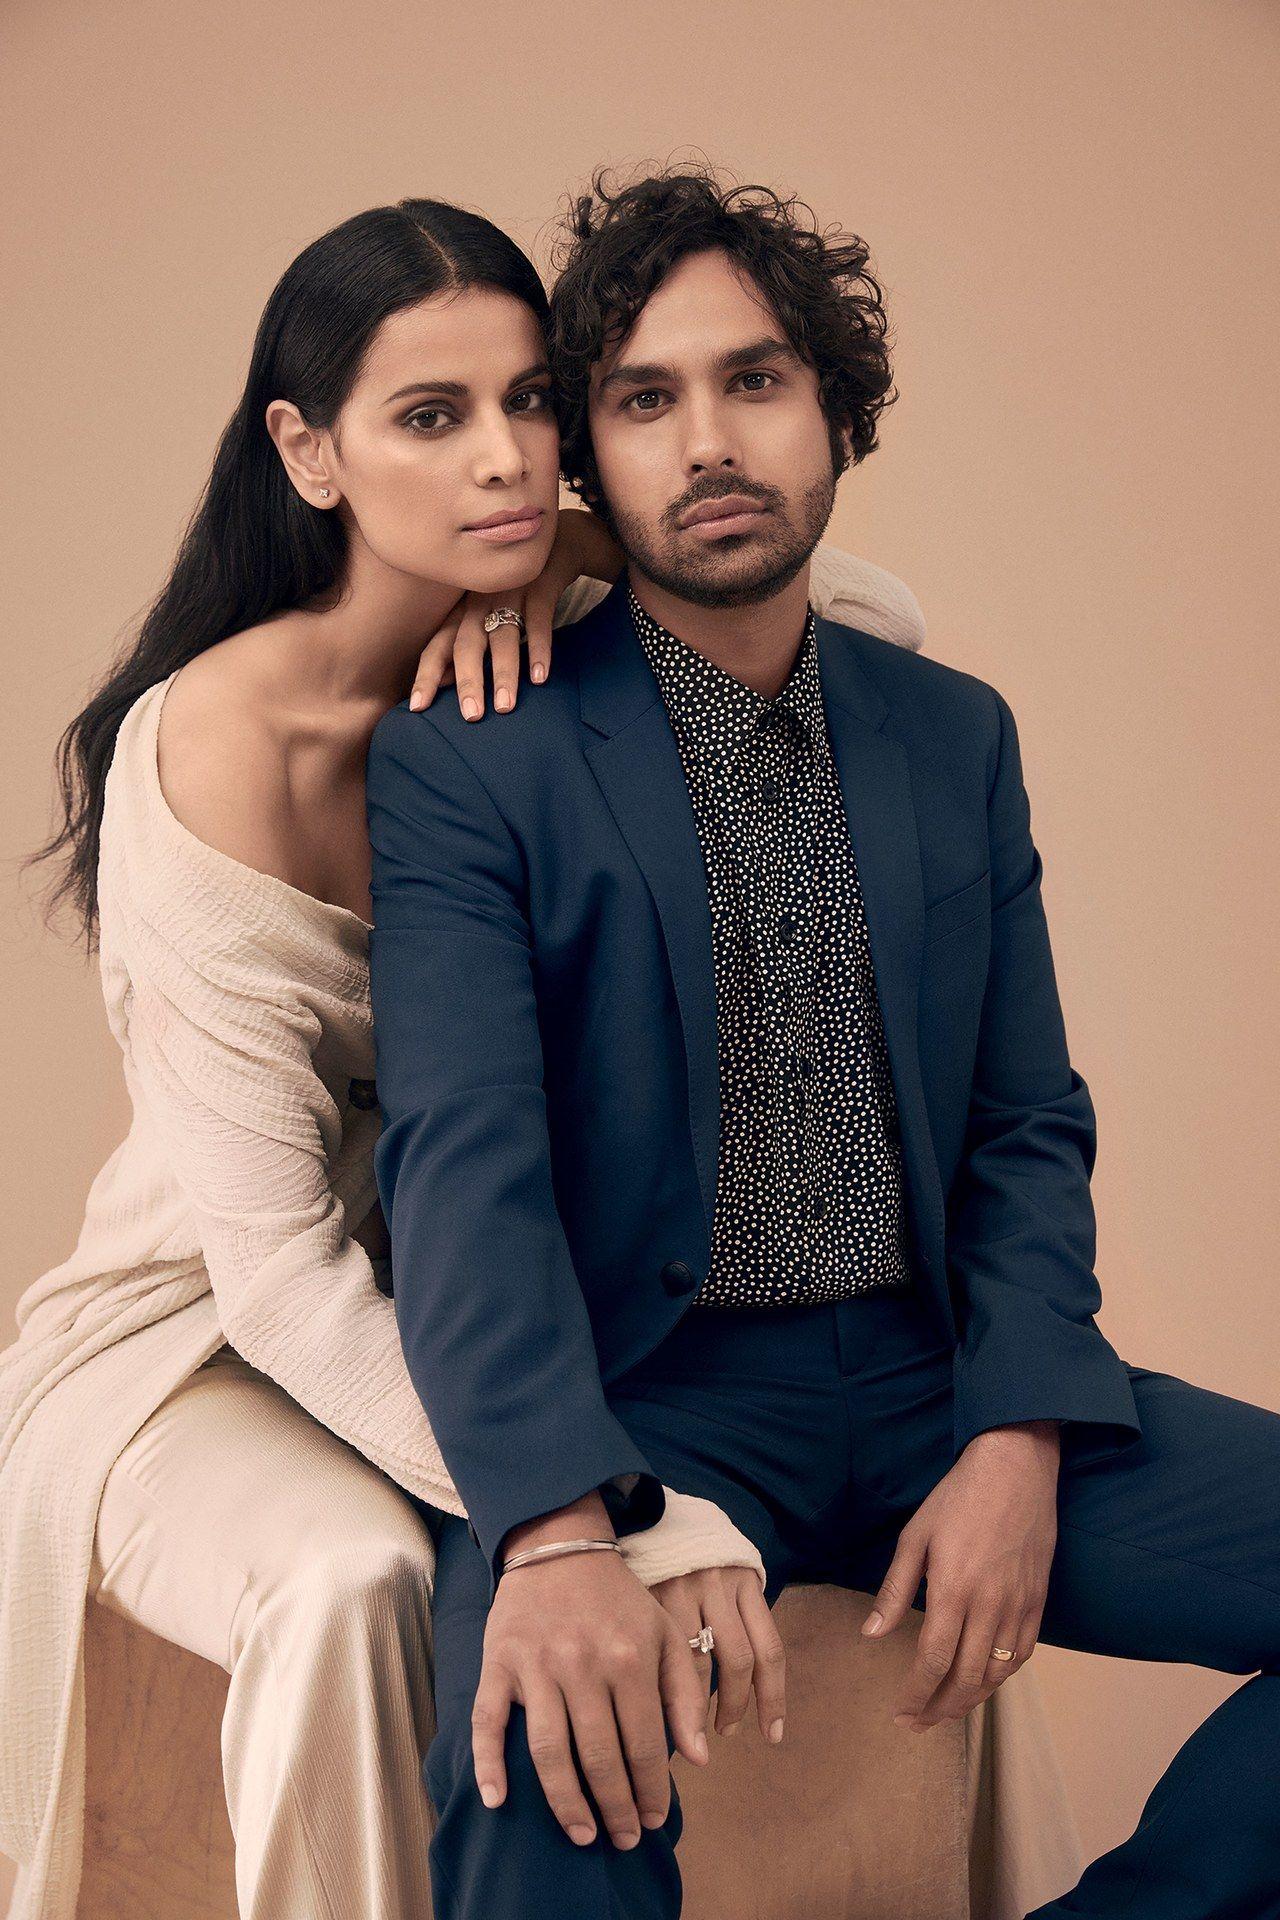 Big Bang Theory' Star Kunal Nayyar and His Wife Reveal the Most